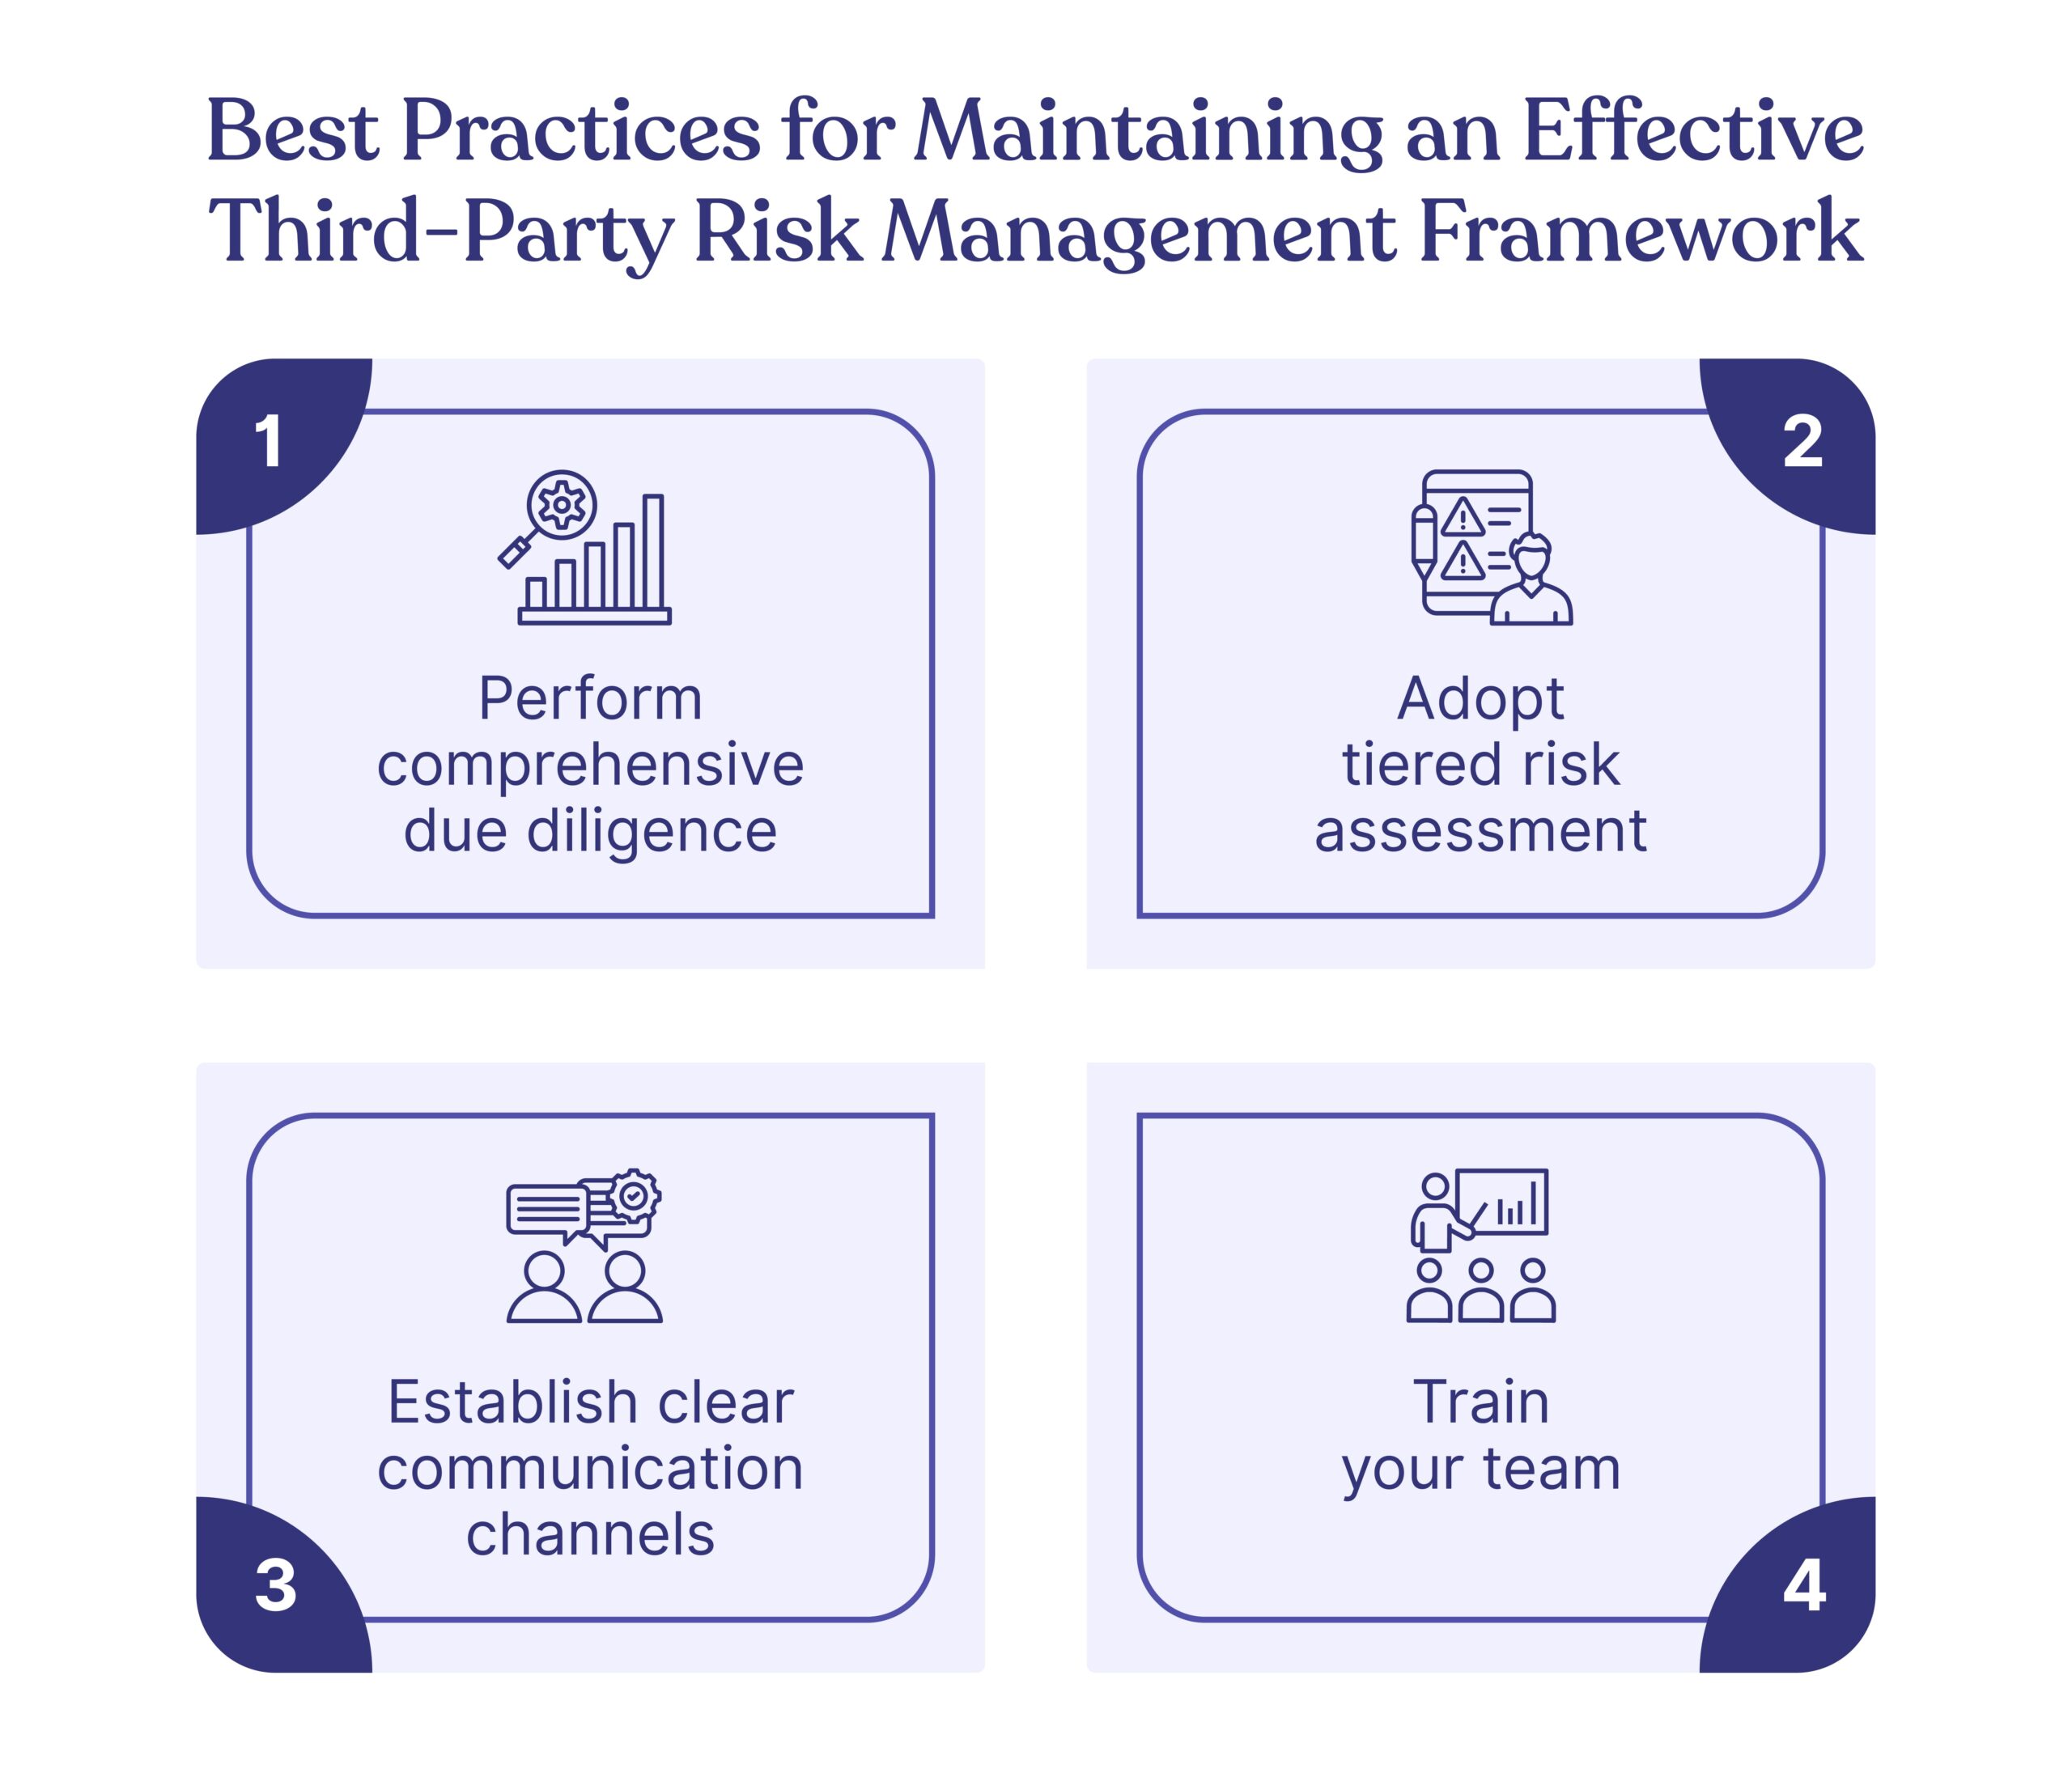 Best Practices for Maintaining an Effective Third-Party Risk Management Framework